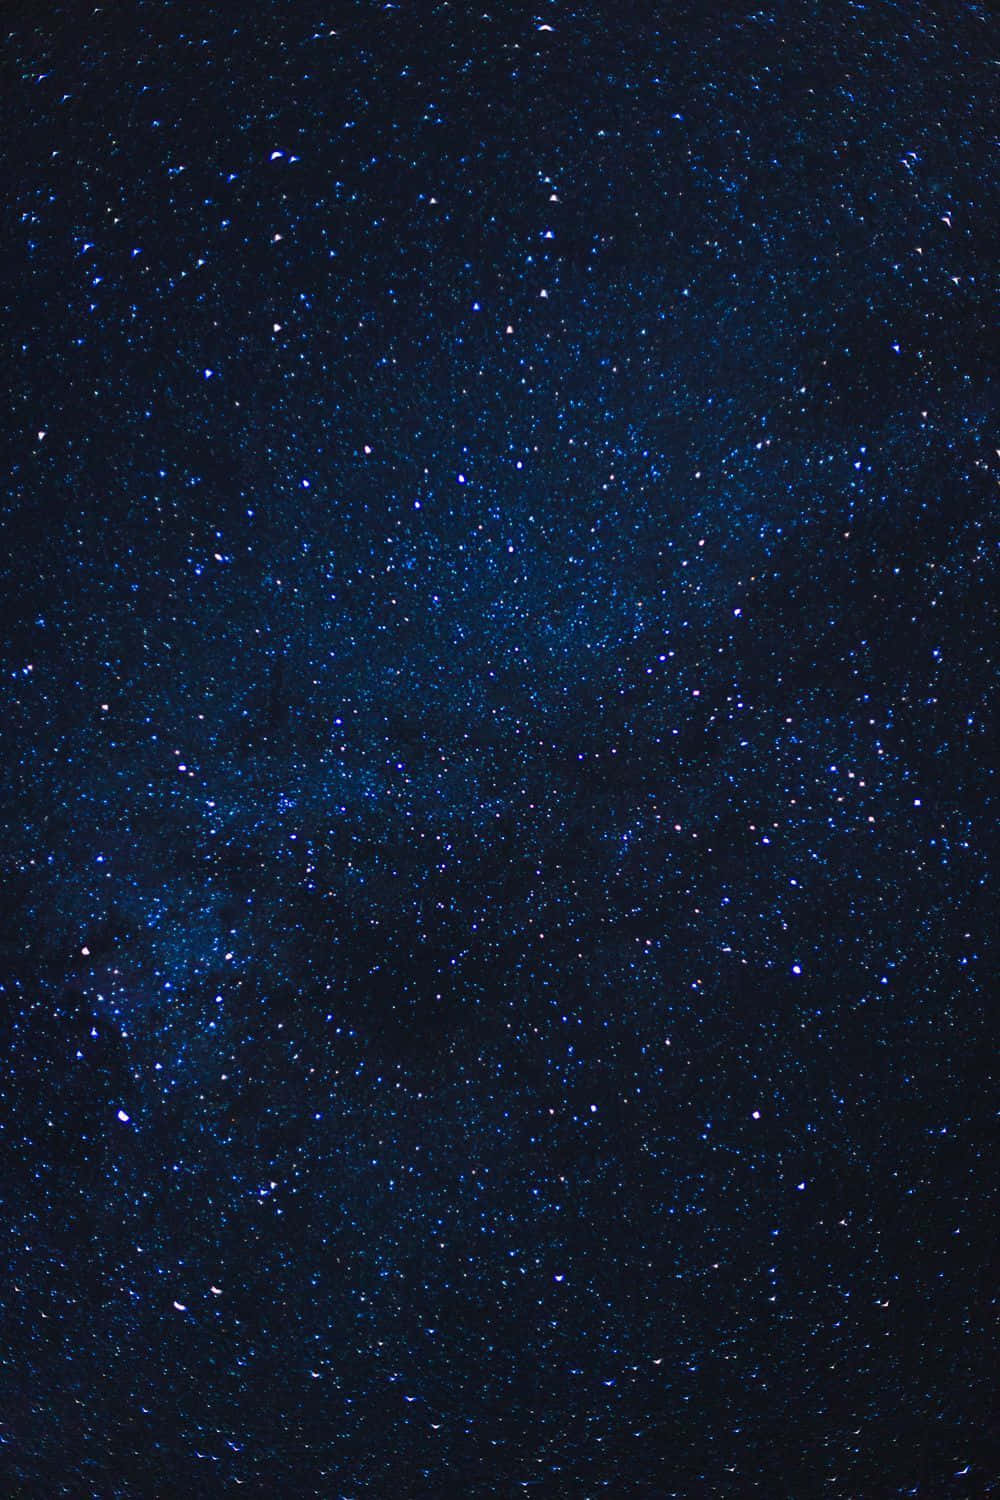 Look up and take in the beauty of the night sky.